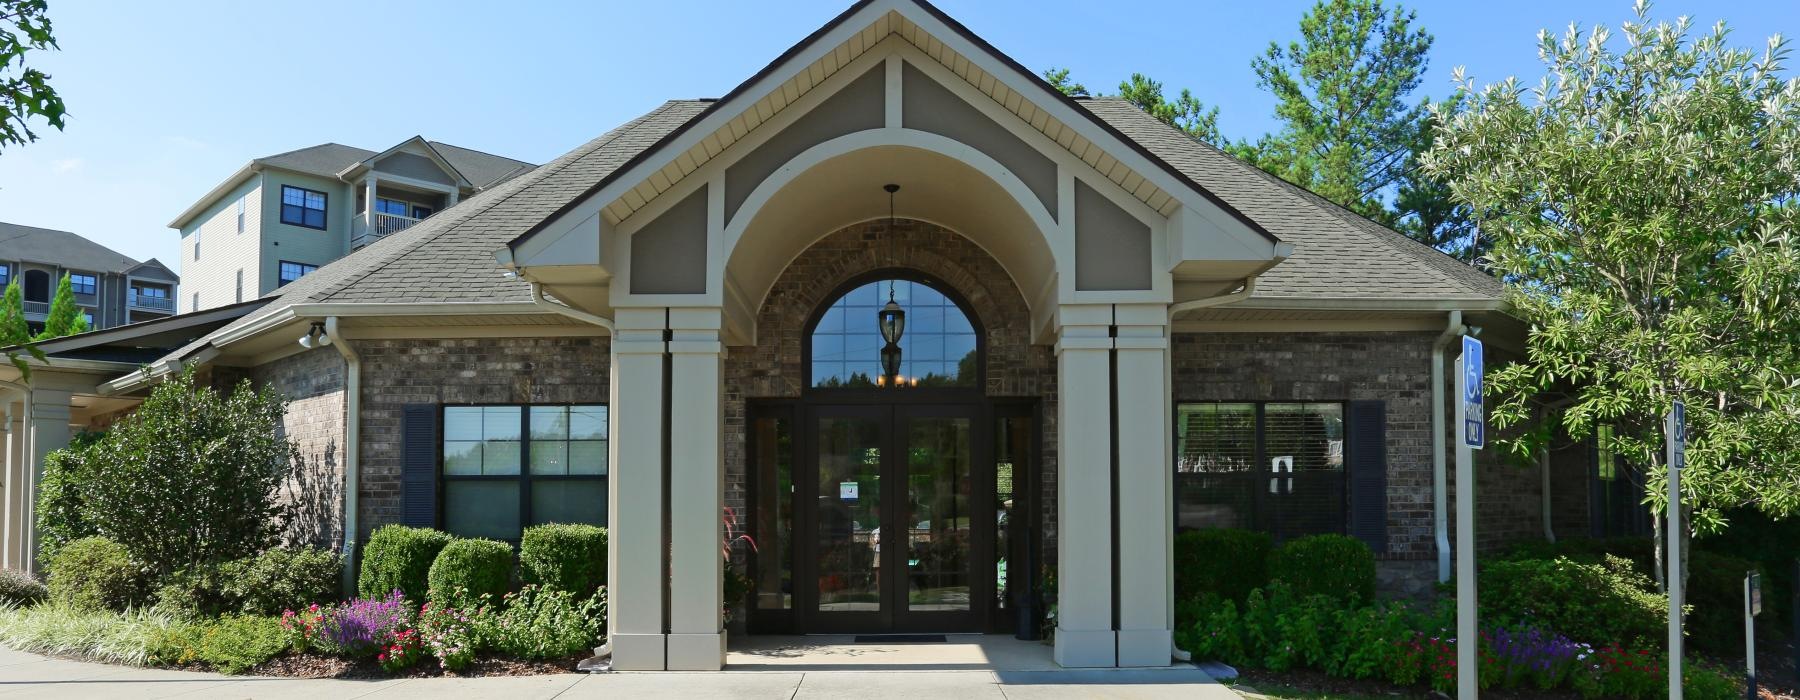 leasing office exterior entrance